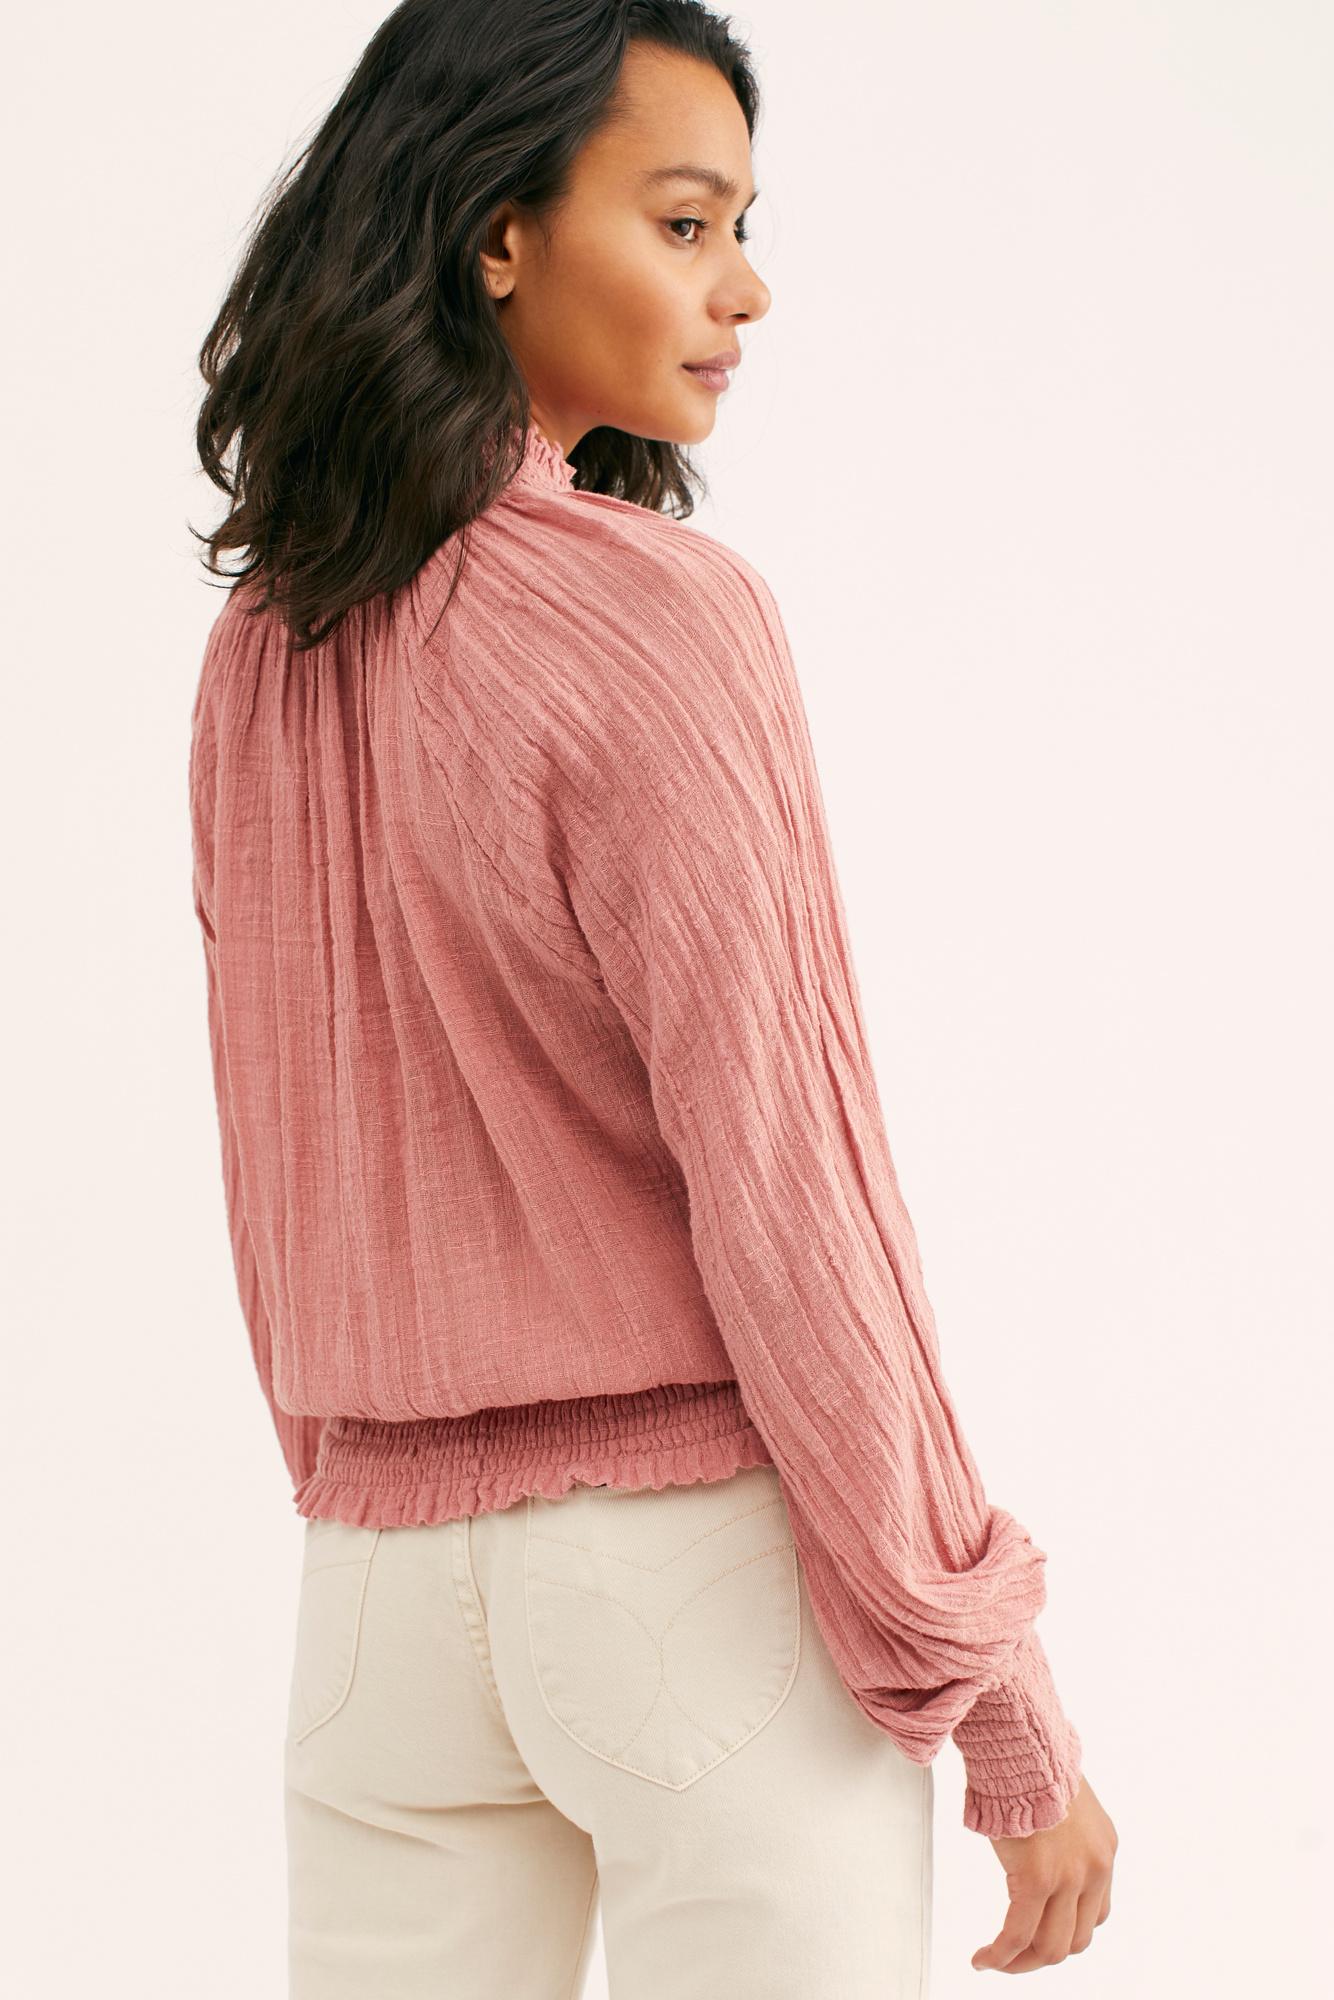 FP One Solid Smocked Top | Tops, Smocked top, Got the look